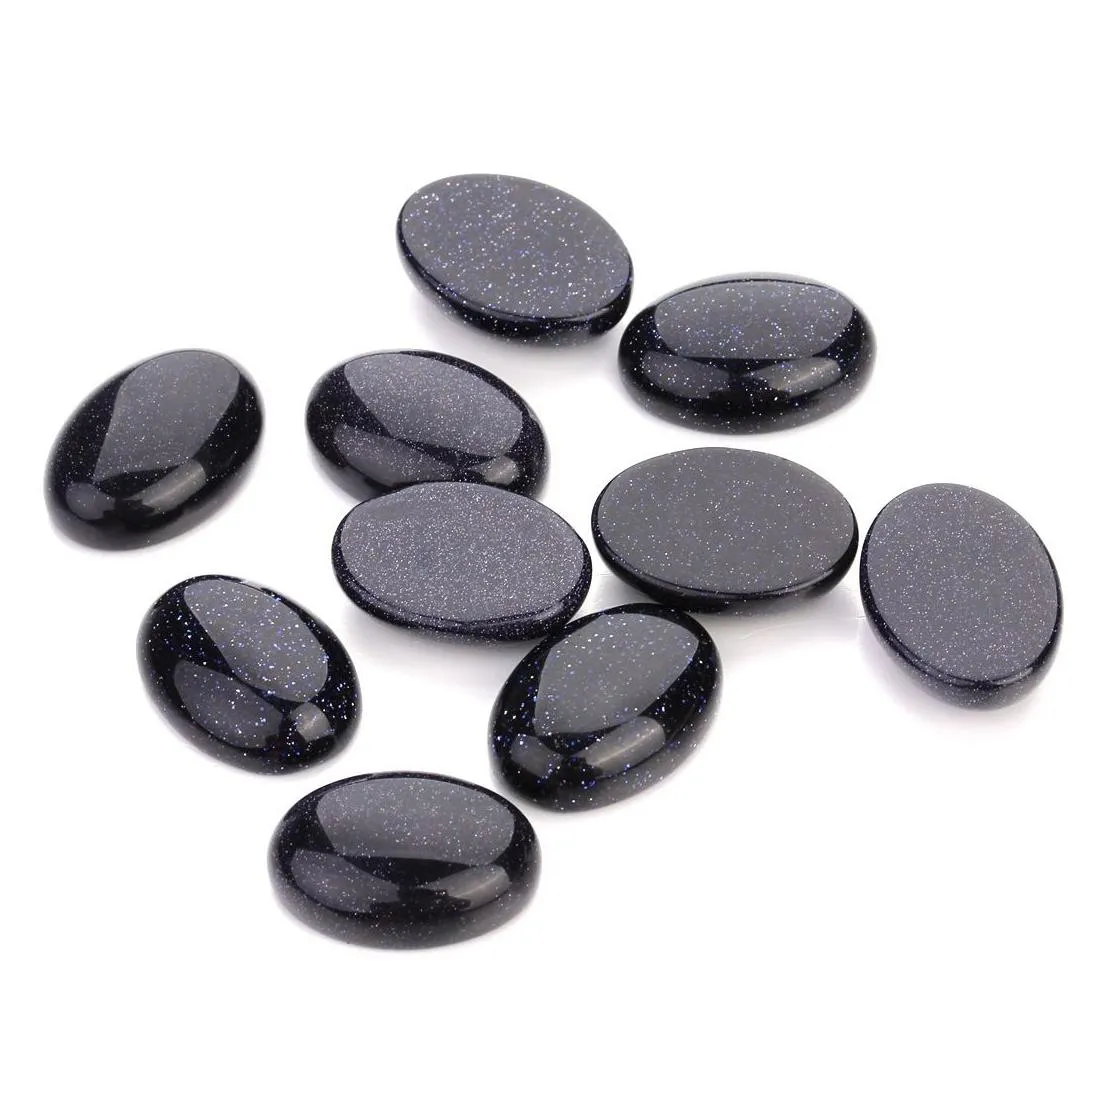 Blue Sandstone Oval Flat Back Gemstone Cabochons Healing Chakra Crystal Stone Bead Cab Covers No Hole for Jewelry Craft Making